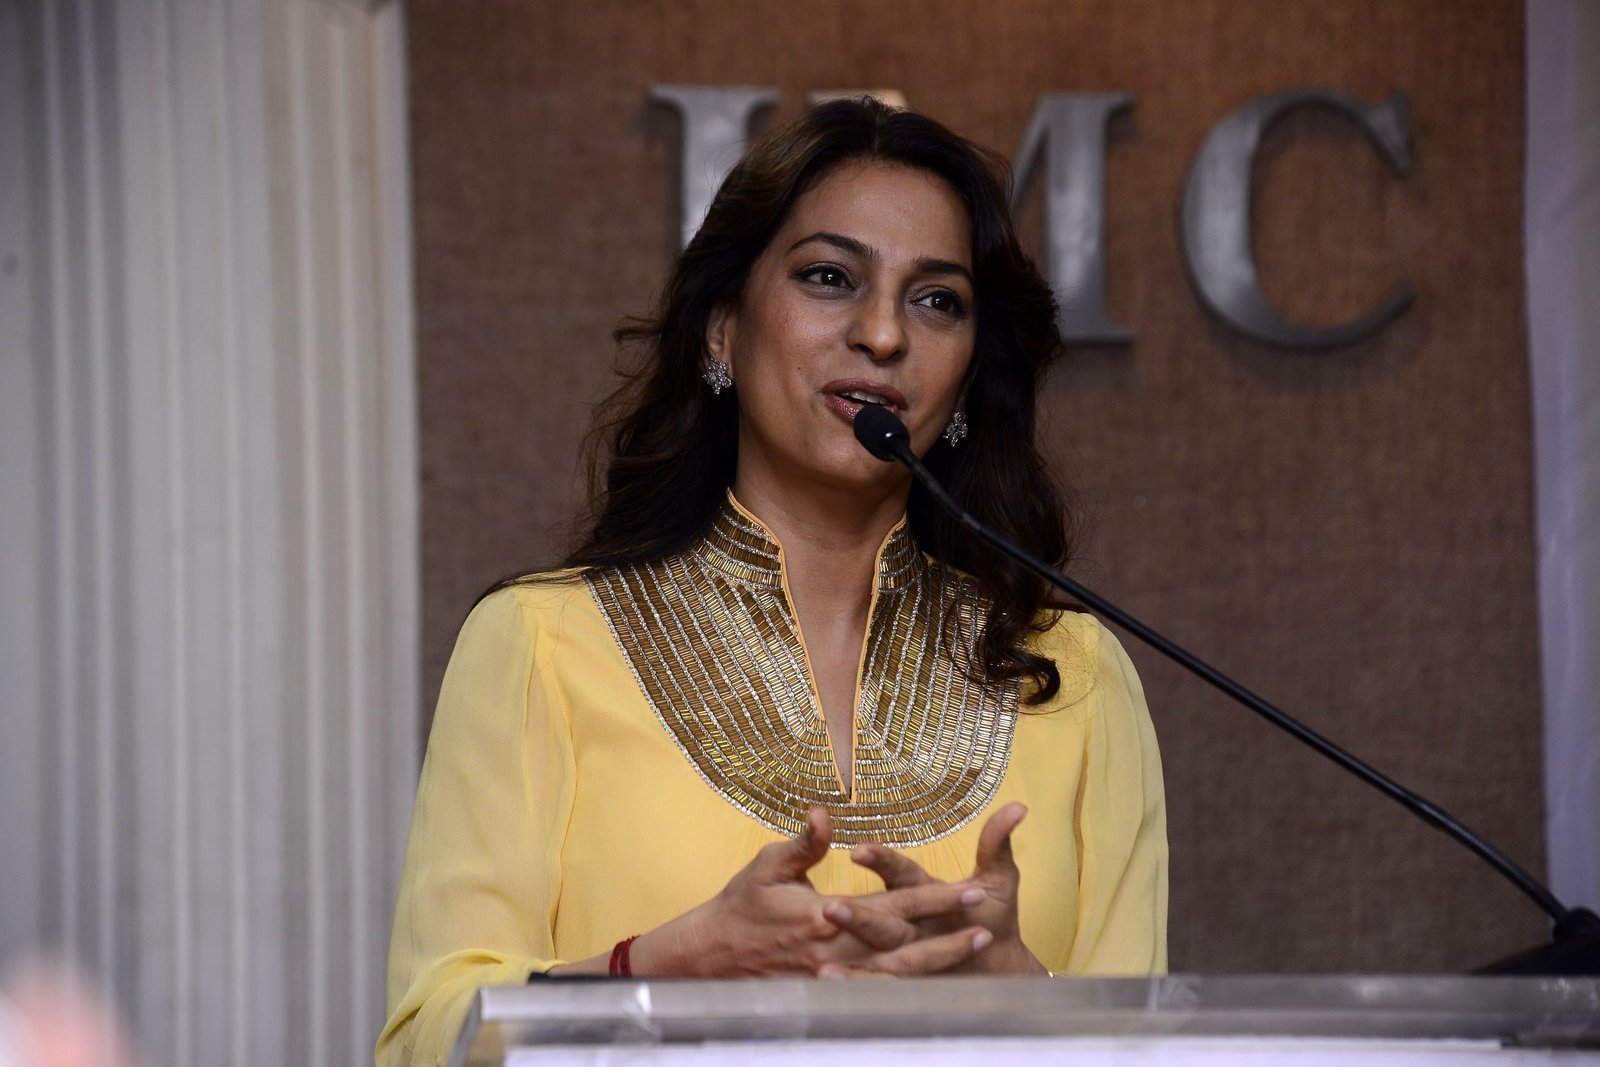  Juhi Chawla during Priyadarshni Academy's 33rd Anniversary Literary Awards Pictures | Picture 1485182